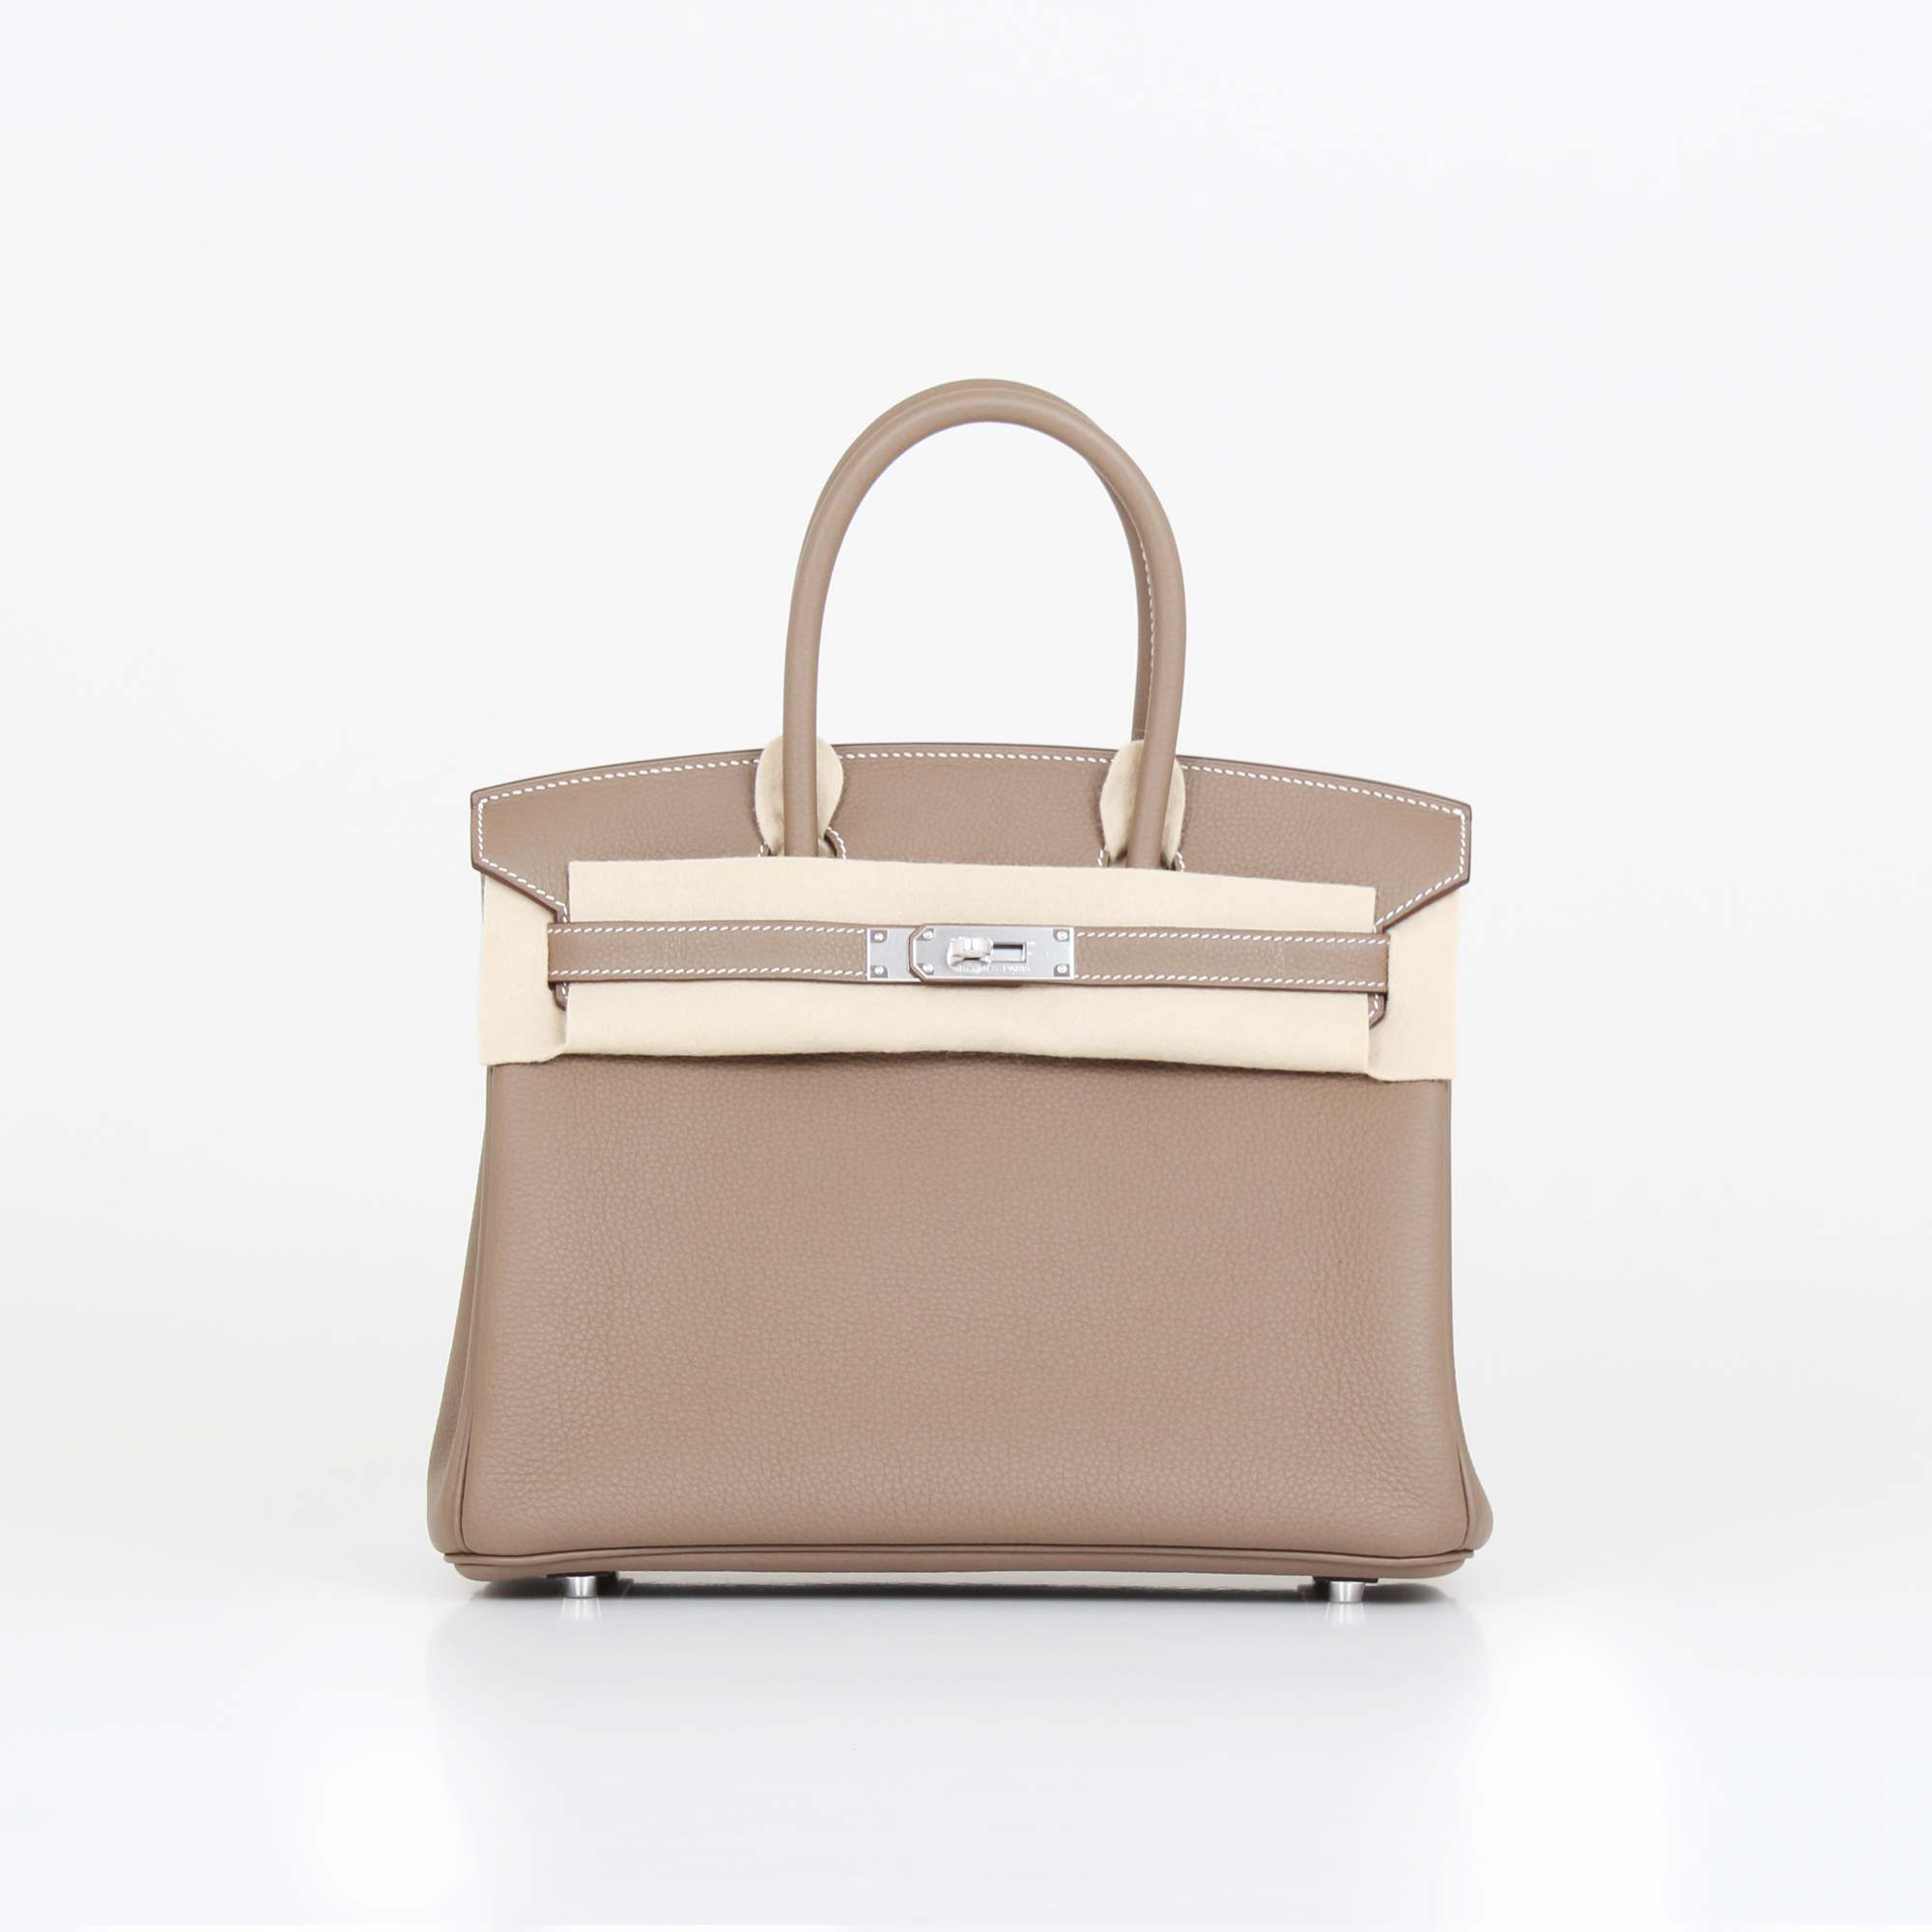 Front image of hermes birkin bag taupe togo with protective cloth